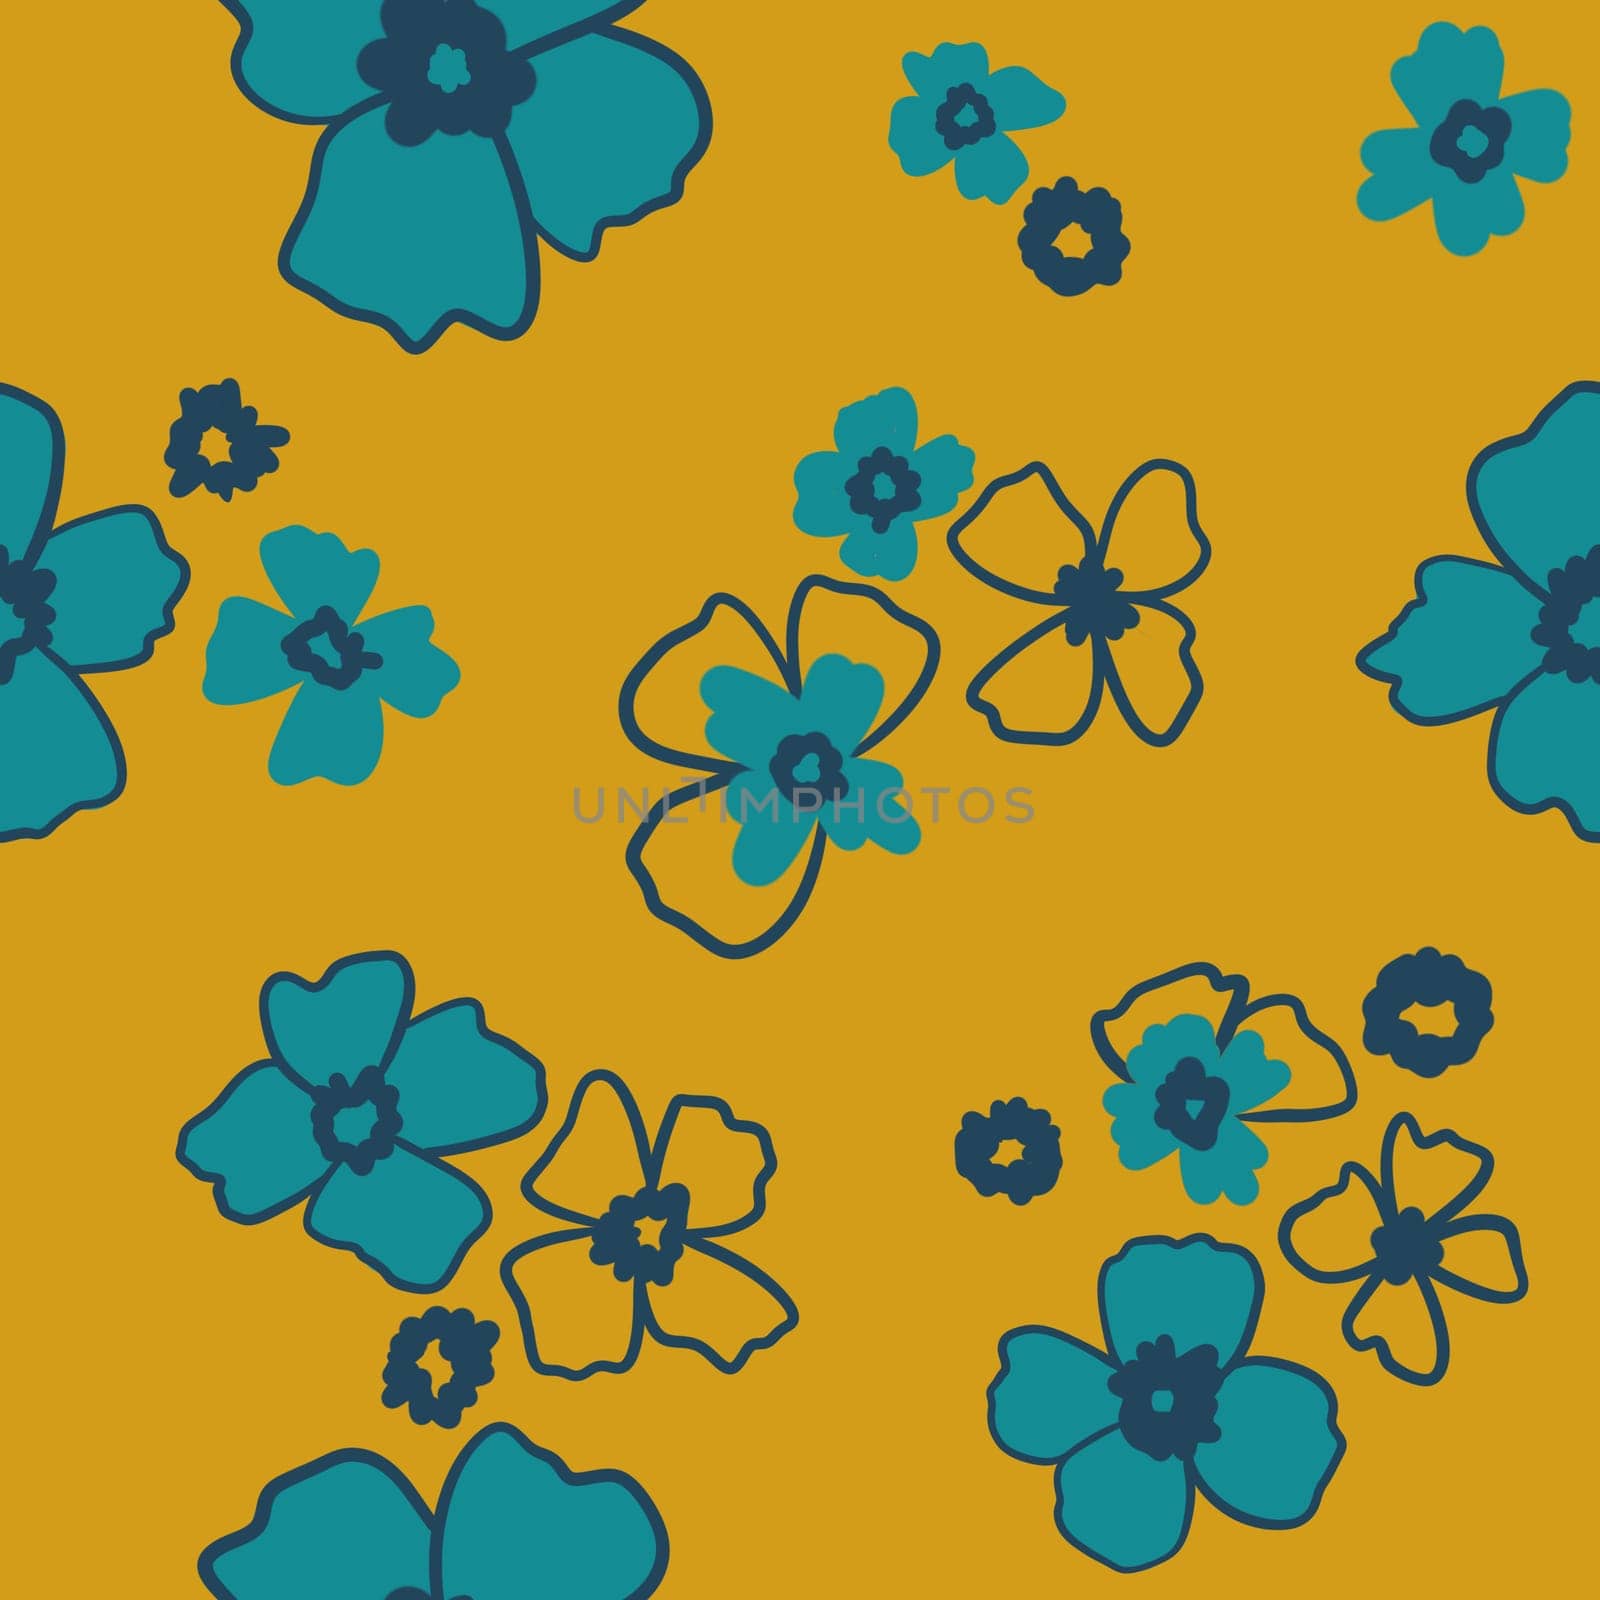 Hand drawn seamless pattern with yellow blue daisy flowers on retro background. Retro vintage mid century modern floral print with red blobs, hippie bloom blossom nature design, warm color